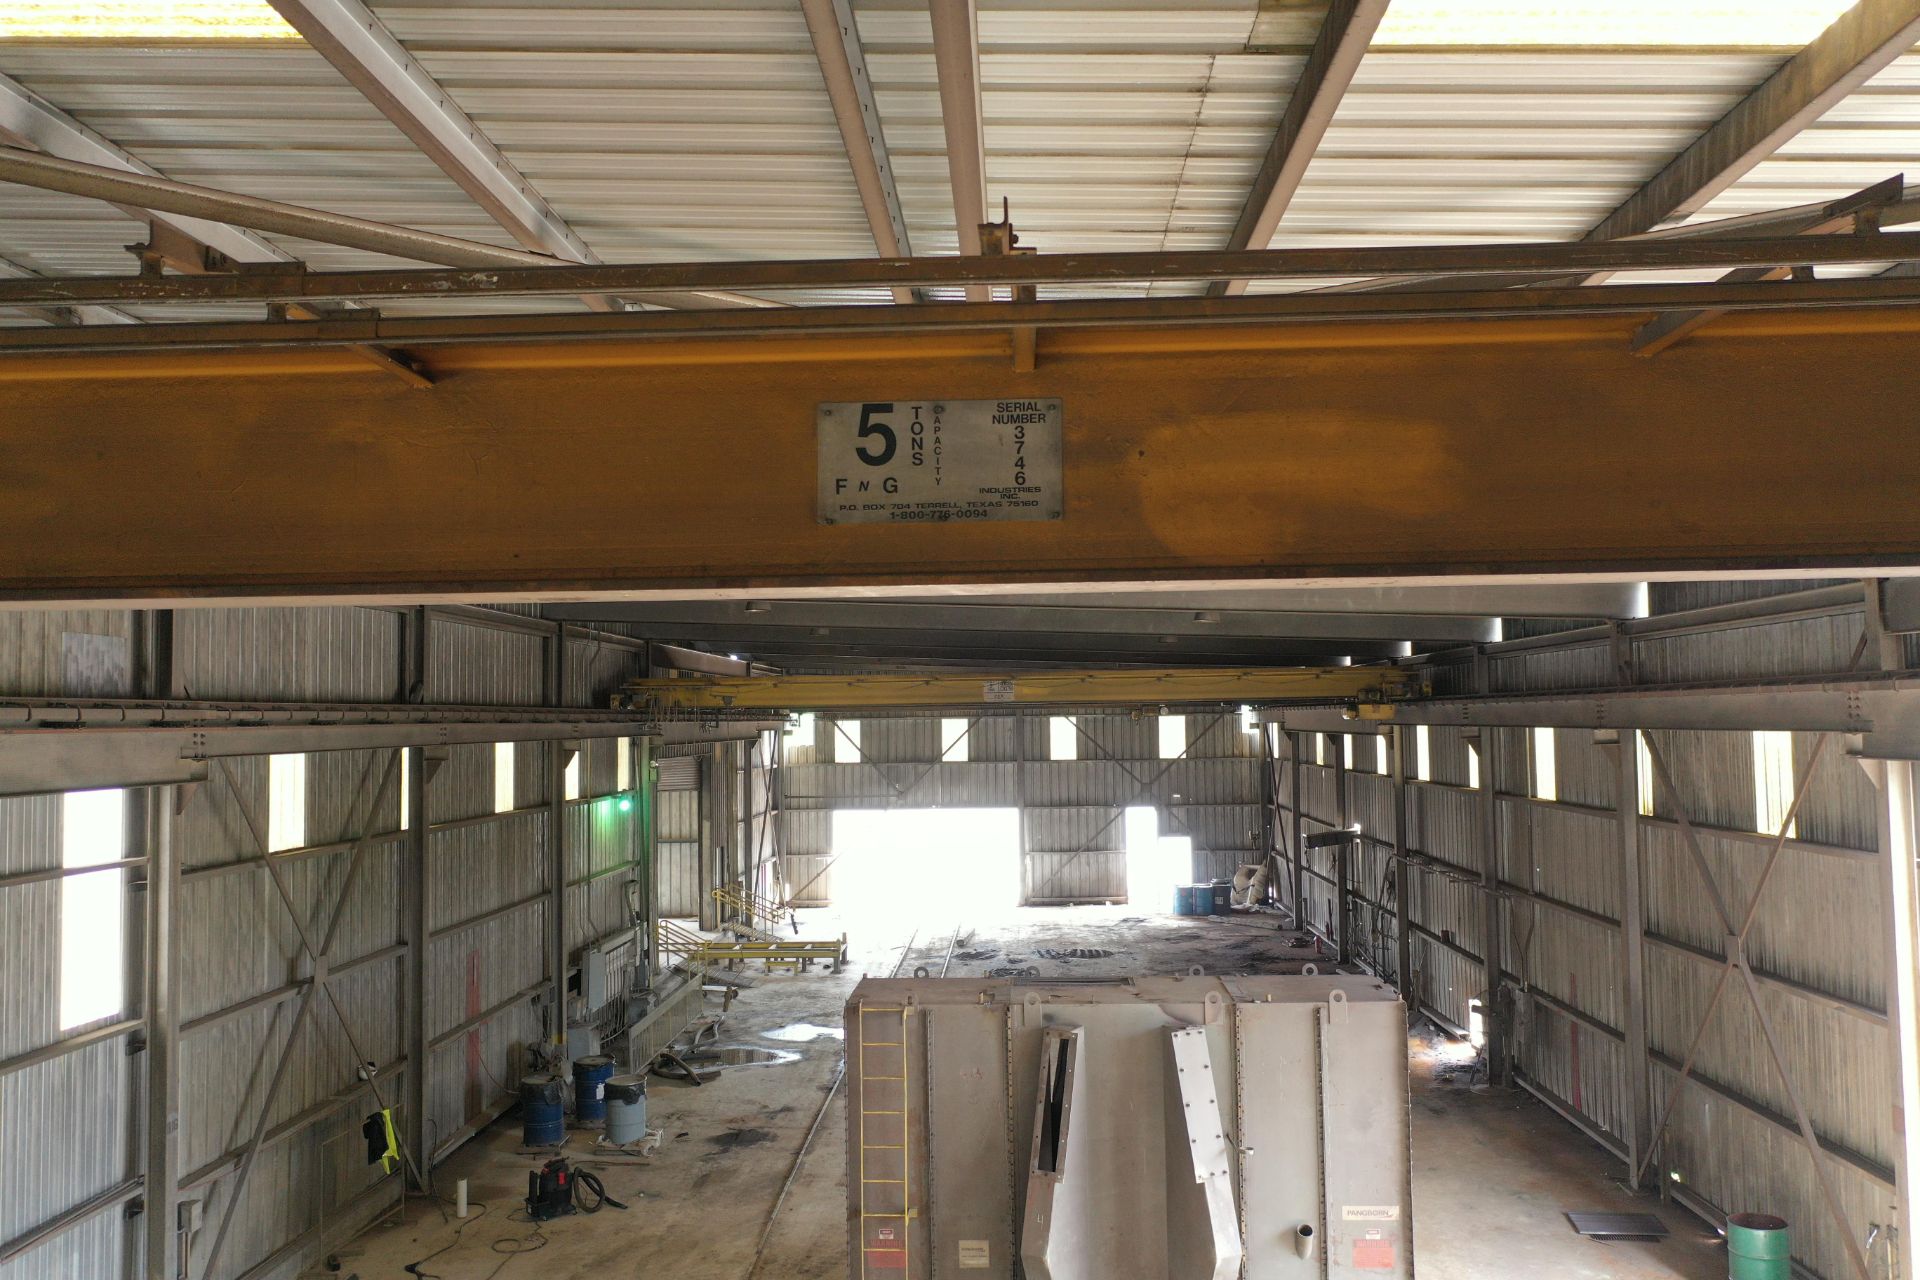 F&G 5 Ton Overhead Crane SN: 3746 with 5 Ton Hoist & Pendant Control, Approx 52 ft Span (LOCATION 1: - Image 2 of 4